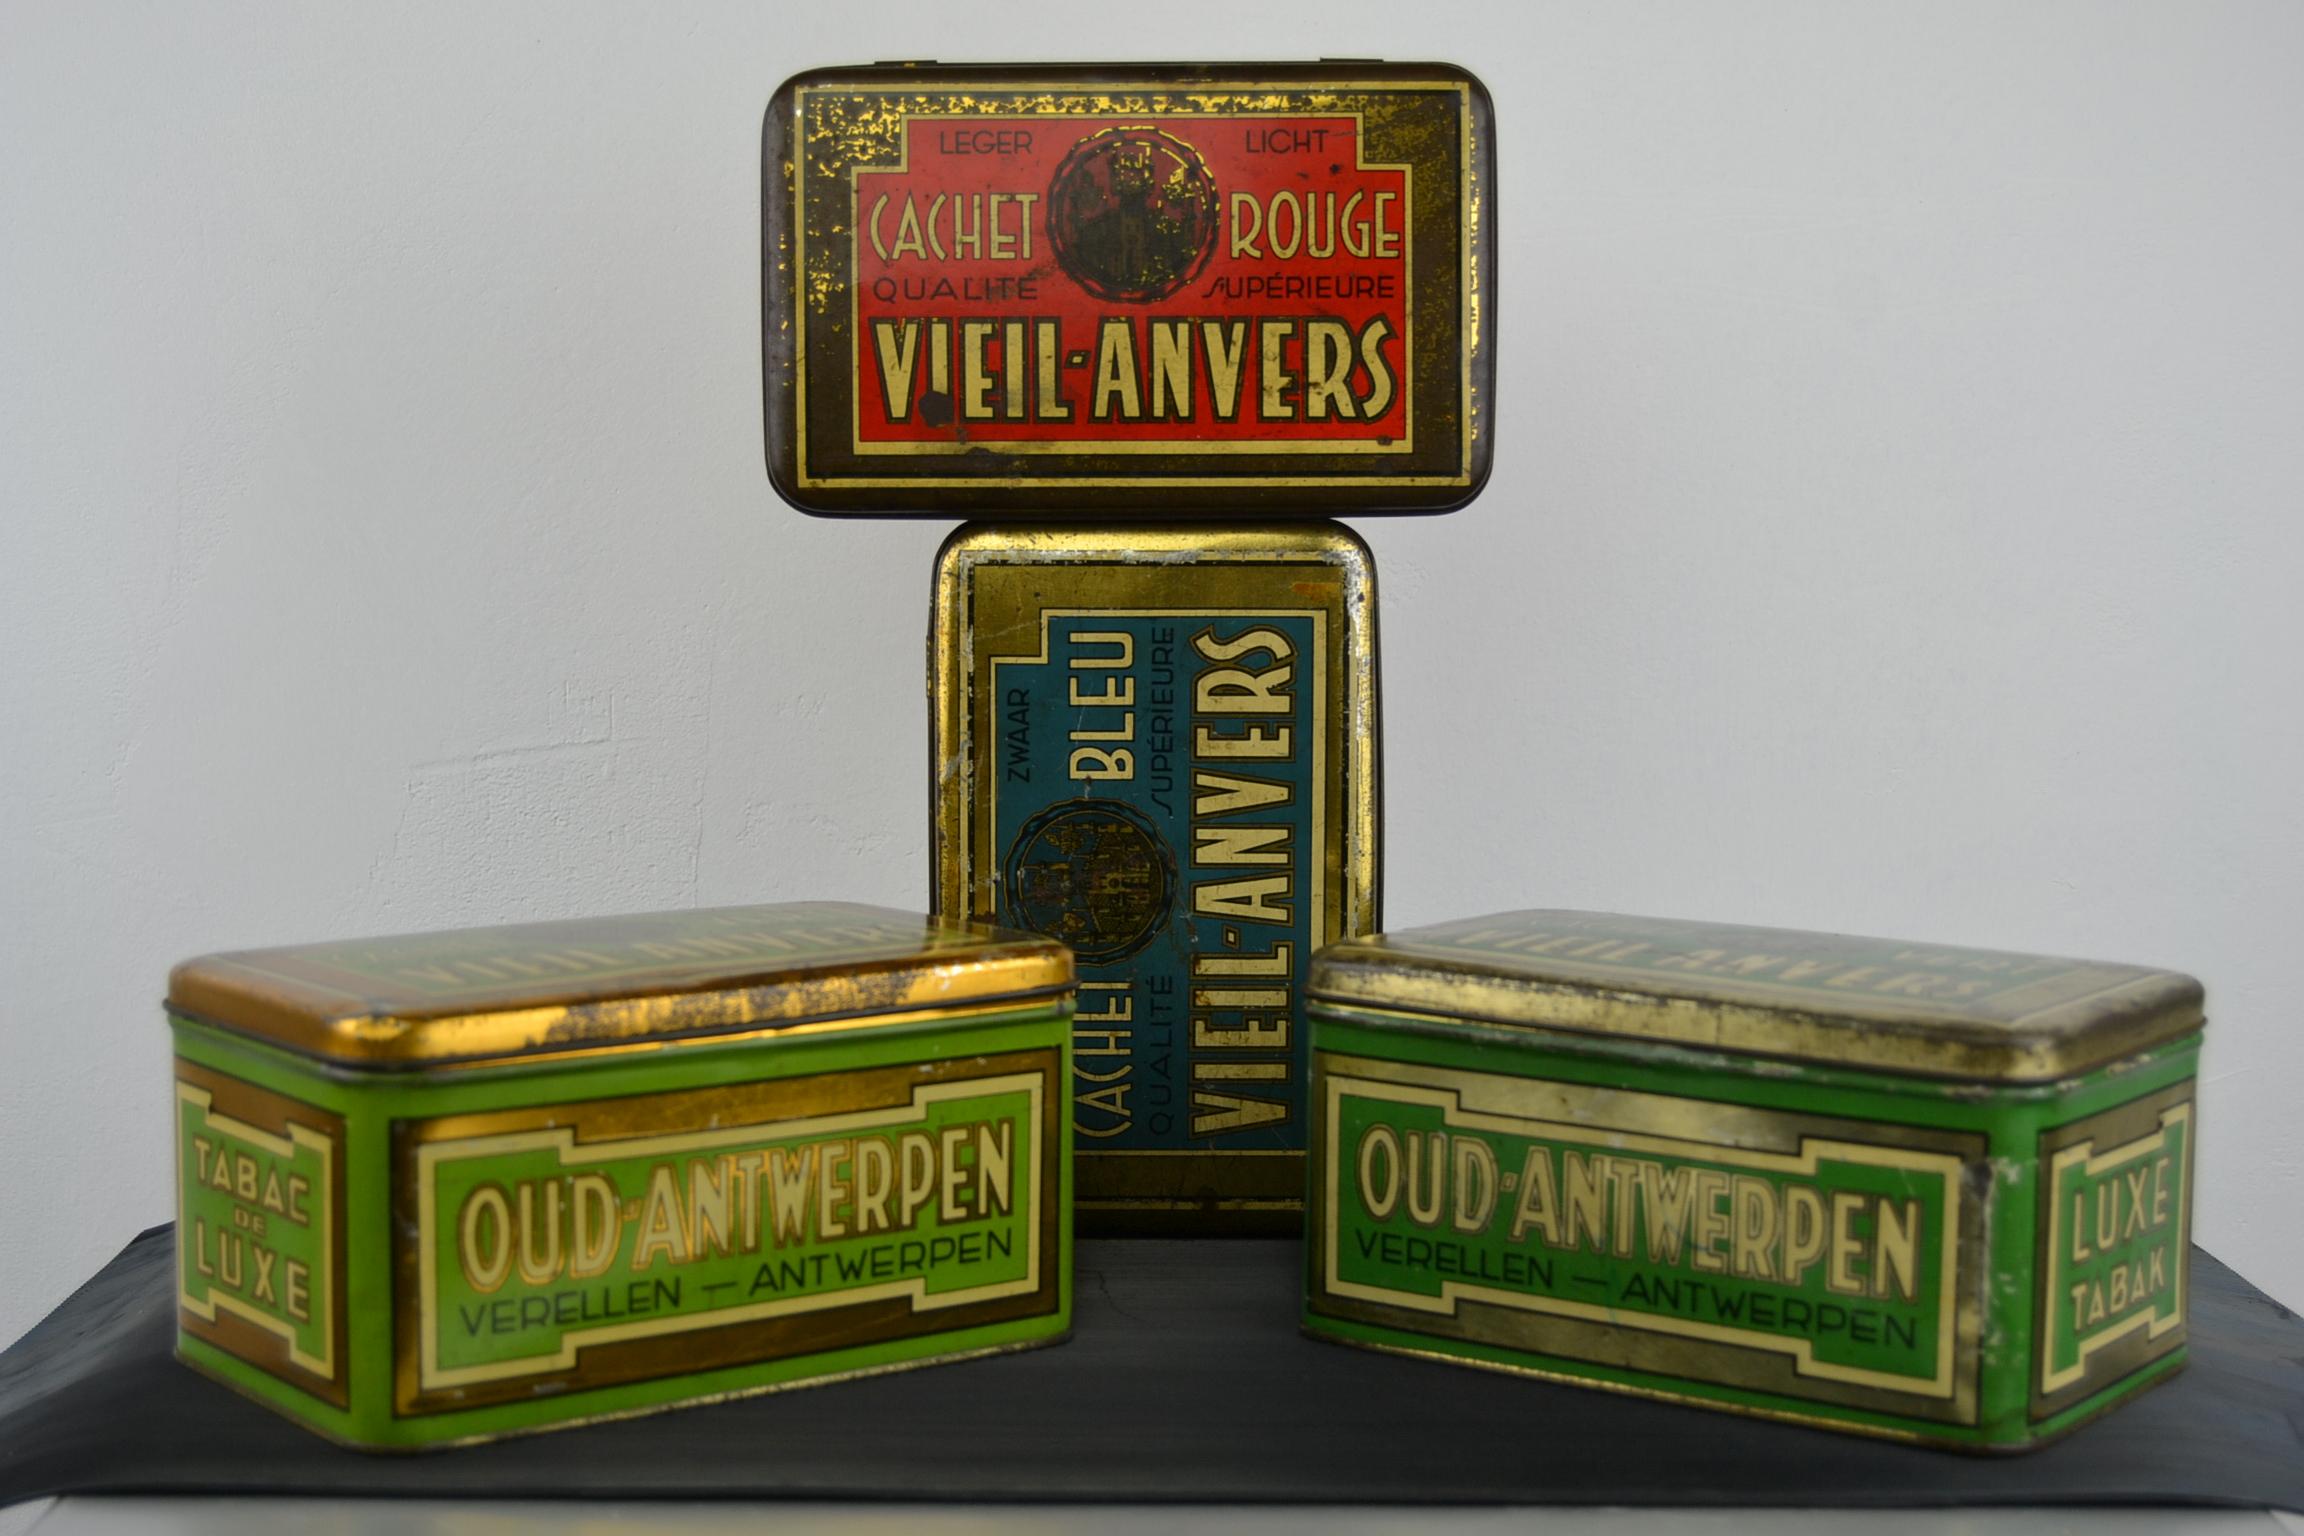 1950s Set of 4 Tobacco Boxes - Tobacco Tins - Cigar Boxes.
These Tins are in different colors: red, blue, green and light green what makes them great to display. 
Vintage Tins Tobacco Vieil Anvers, Old Antwerp.
Cigar Company Verellen.

All in good